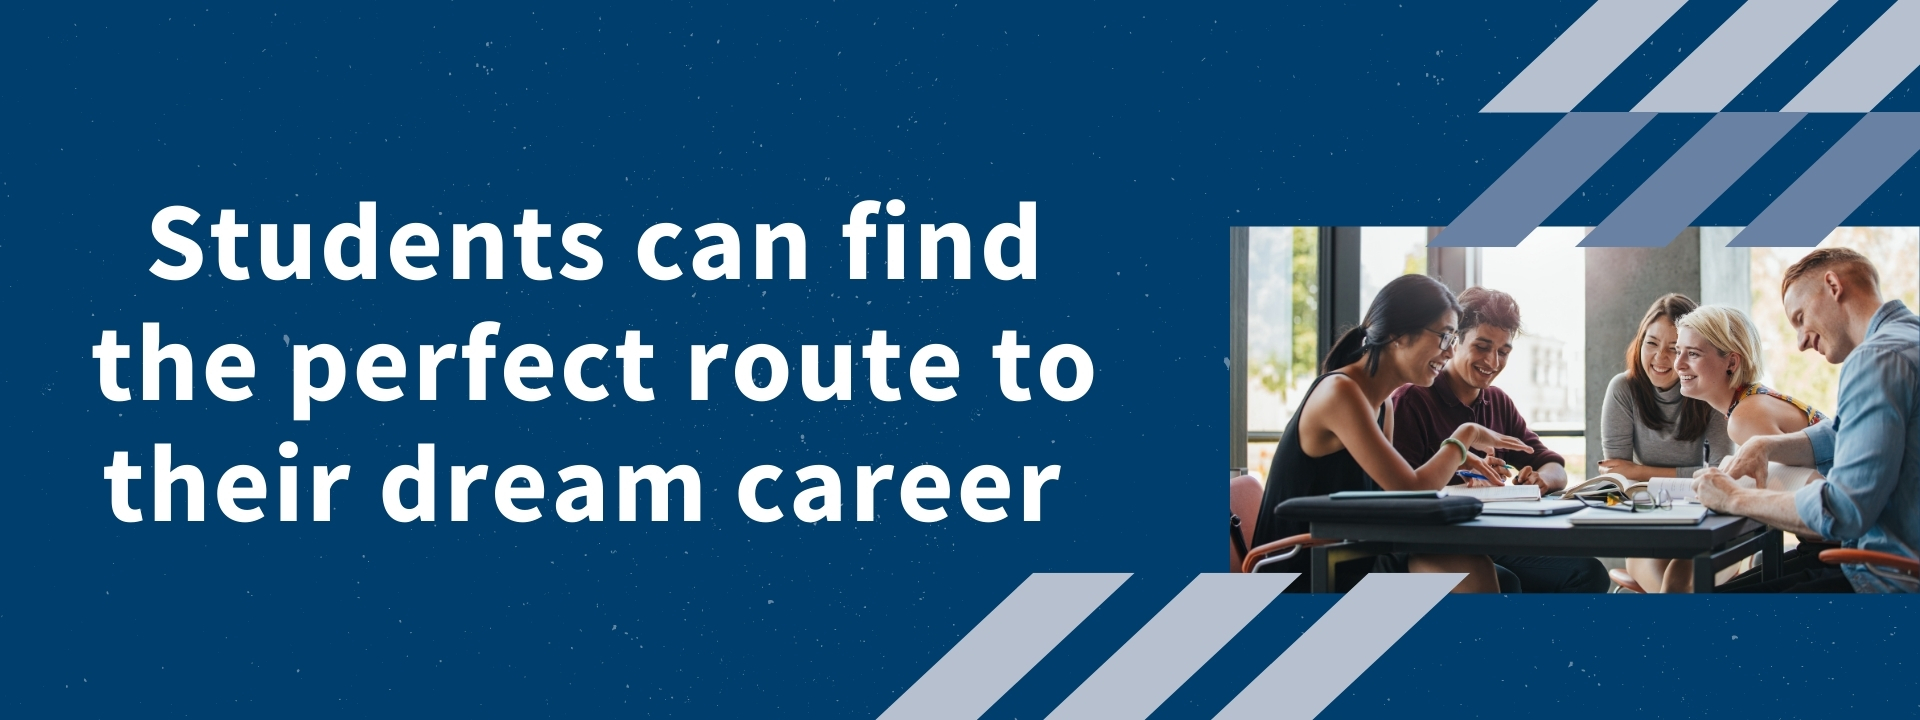 Students can find the perfect route to their dream career